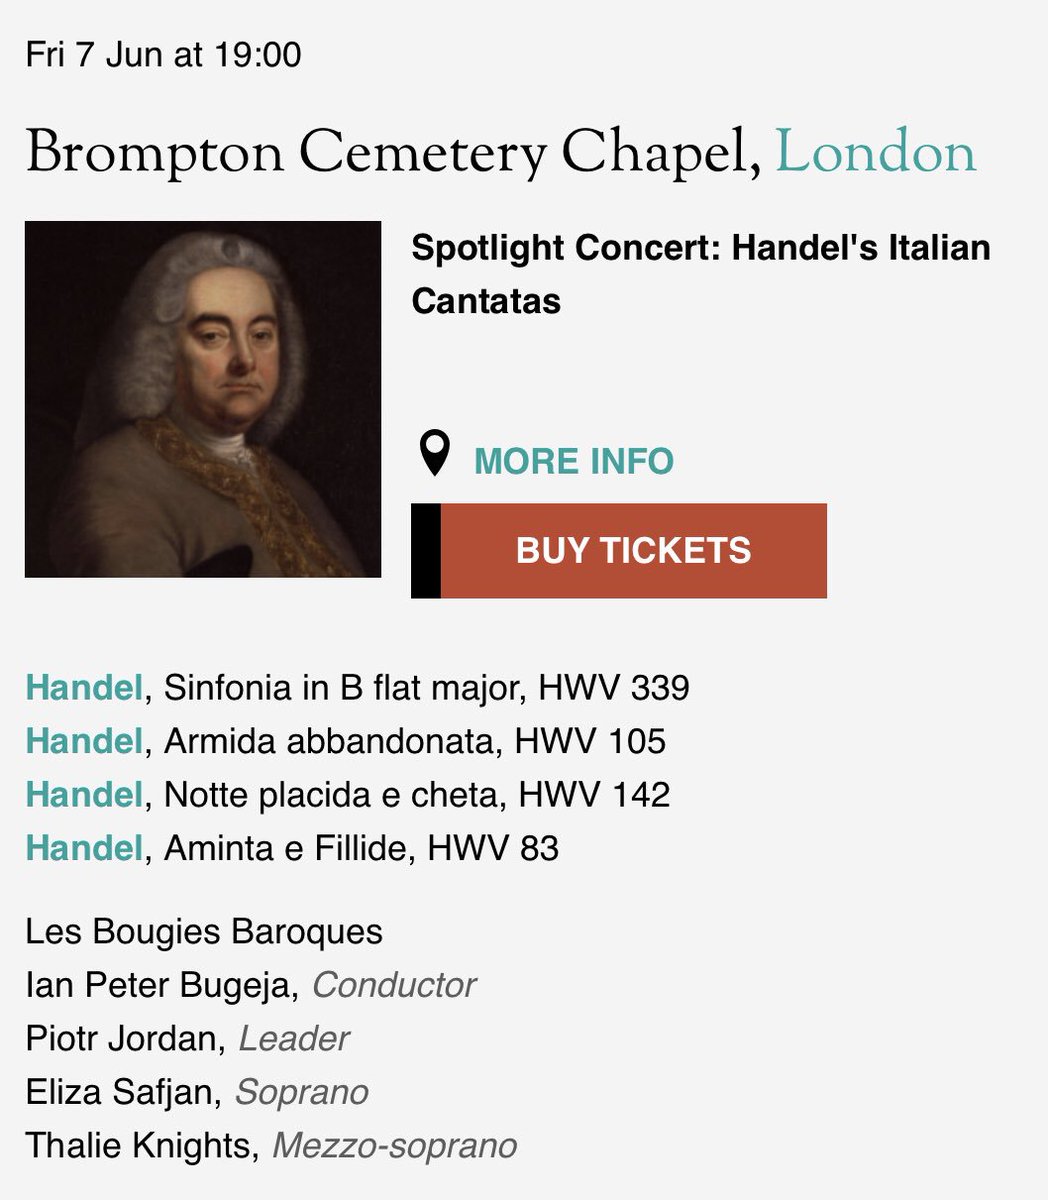 Our 7/6/19 #Handel #ItalianCantatas #concert at @theroyalparks’s #BromptonCemetery w/@FOBCOfficial,@elizasafjan,@Thalie_Knights & @IanPeterB feat.on @bachtrack:bachtrack.com/concert-listin…

#baroquemusic #classicalmusic #periodinstruments #soprano #mezzosoprano #opera #history #london